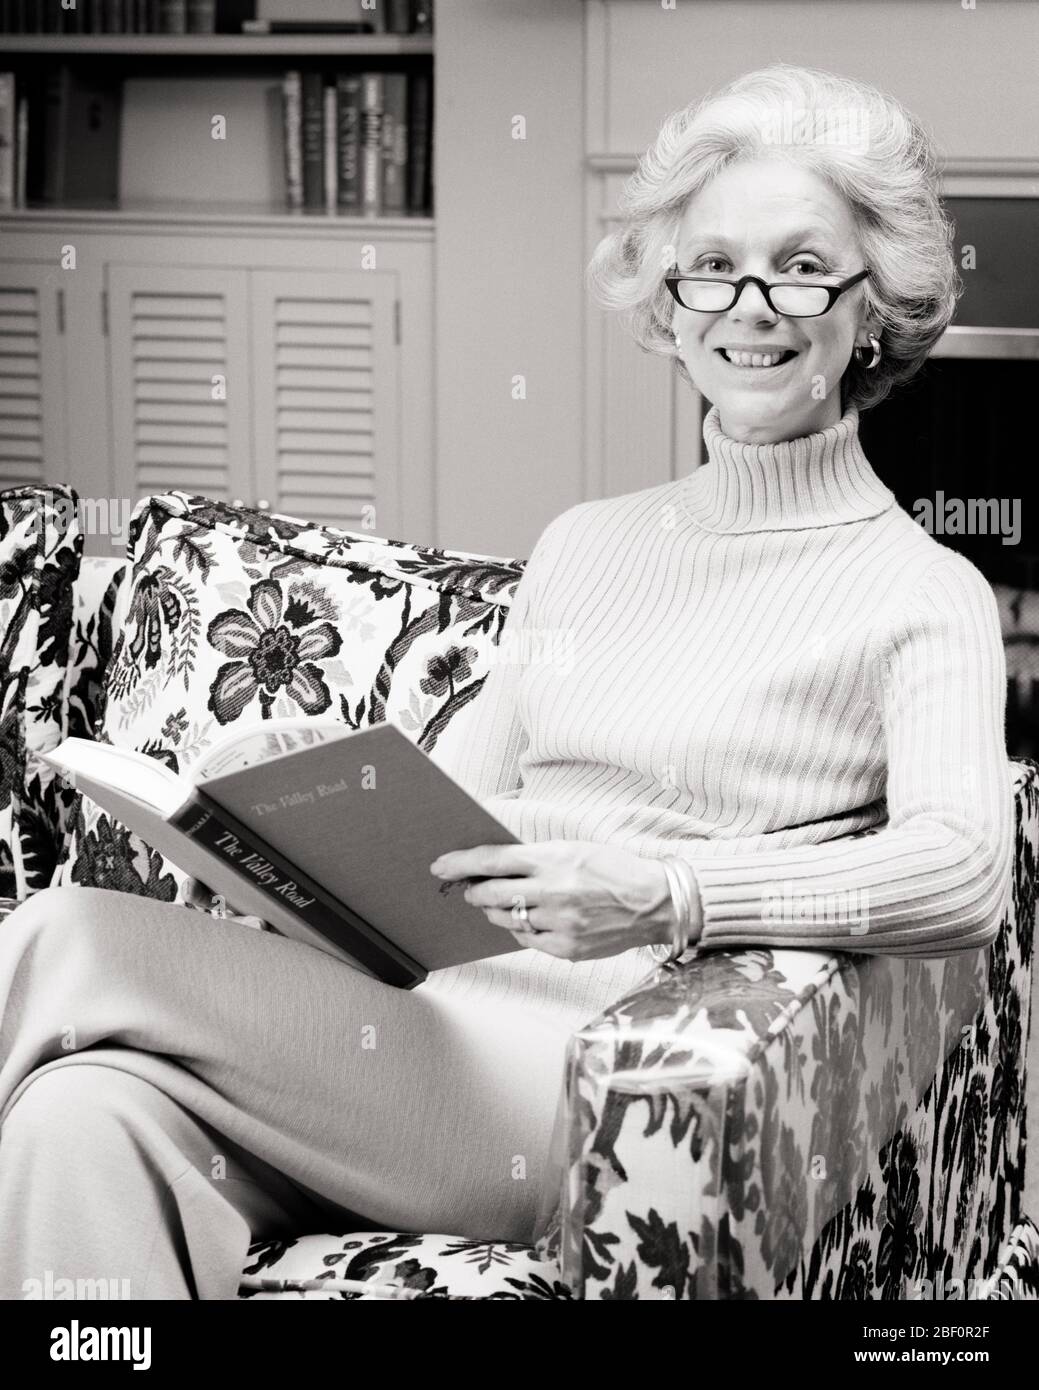 1970s MATURE RELAXED SLENDER HEALTHY WOMAN HOLDING A BOOK WEARING READER EYEGLASSES TURTLENECK SWEATER LOOKING AT CAMERA SMILING - r24219 HAR001 HARS PHYSICAL FITNESS PERSONS CONFIDENCE EYEGLASSES EXPRESSIONS MIDDLE-AGED B&W EYE CONTACT HAPPINESS MIDDLE-AGED WOMAN WELLNESS CHEERFUL LEISURE KNOWLEDGE RELAXED SLACKS SMILES WHITE HAIR CONTENT JOYFUL READER STYLISH RELAXATION SLENDER AT HOME BLACK AND WHITE CAUCASIAN ETHNICITY HAR001 OLD FASHIONED TURTLENECK Stock Photo